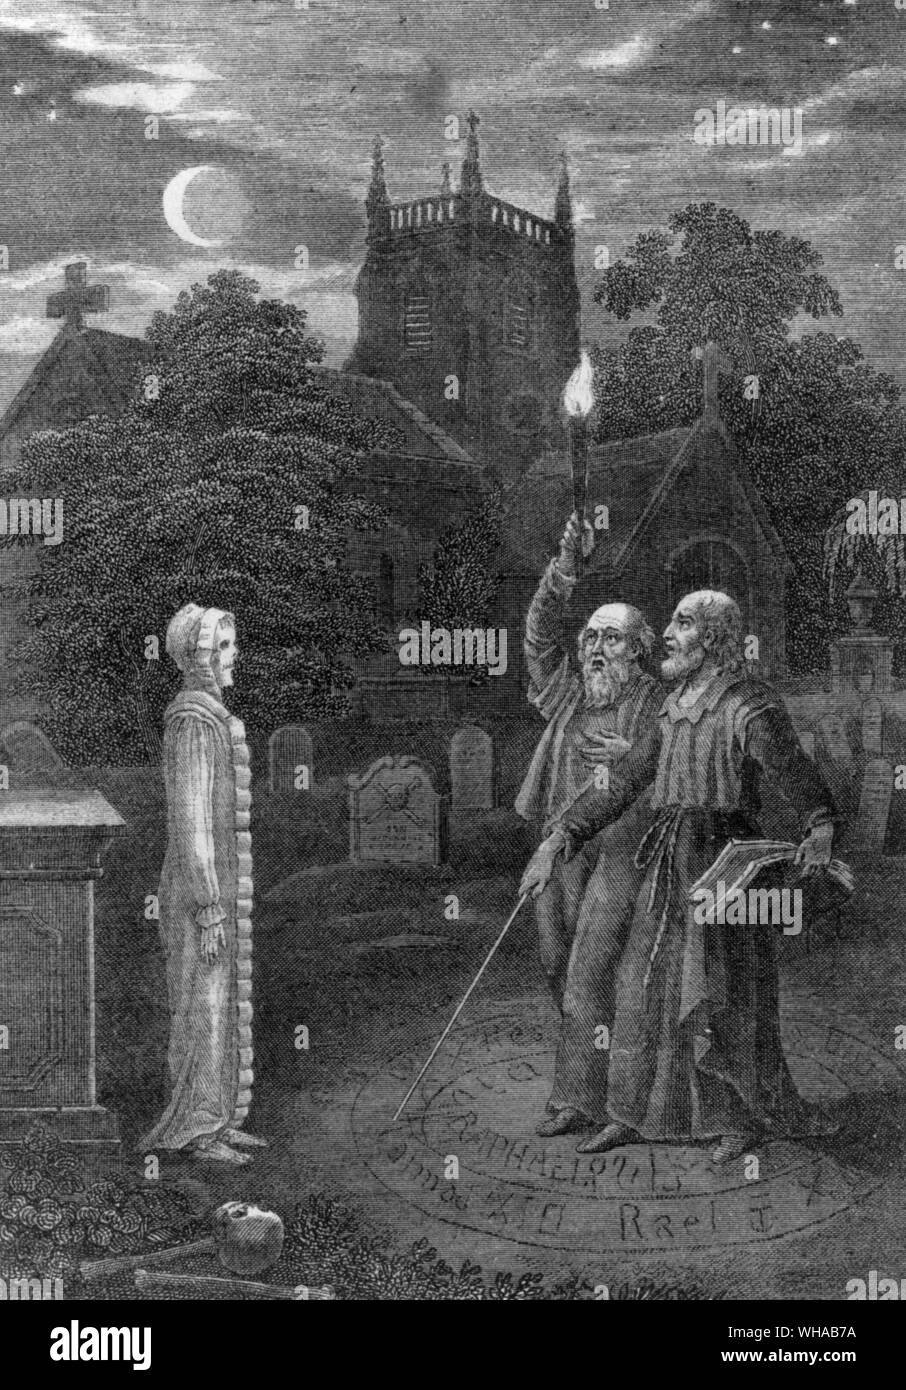 Dr John Dee and Edward Kelly making a Dead Person appear in an English cemetery. Mathieu Giraldo, Histoire Curieuse et Pittoresque des Sorciers . Paris1846 Stock Photo